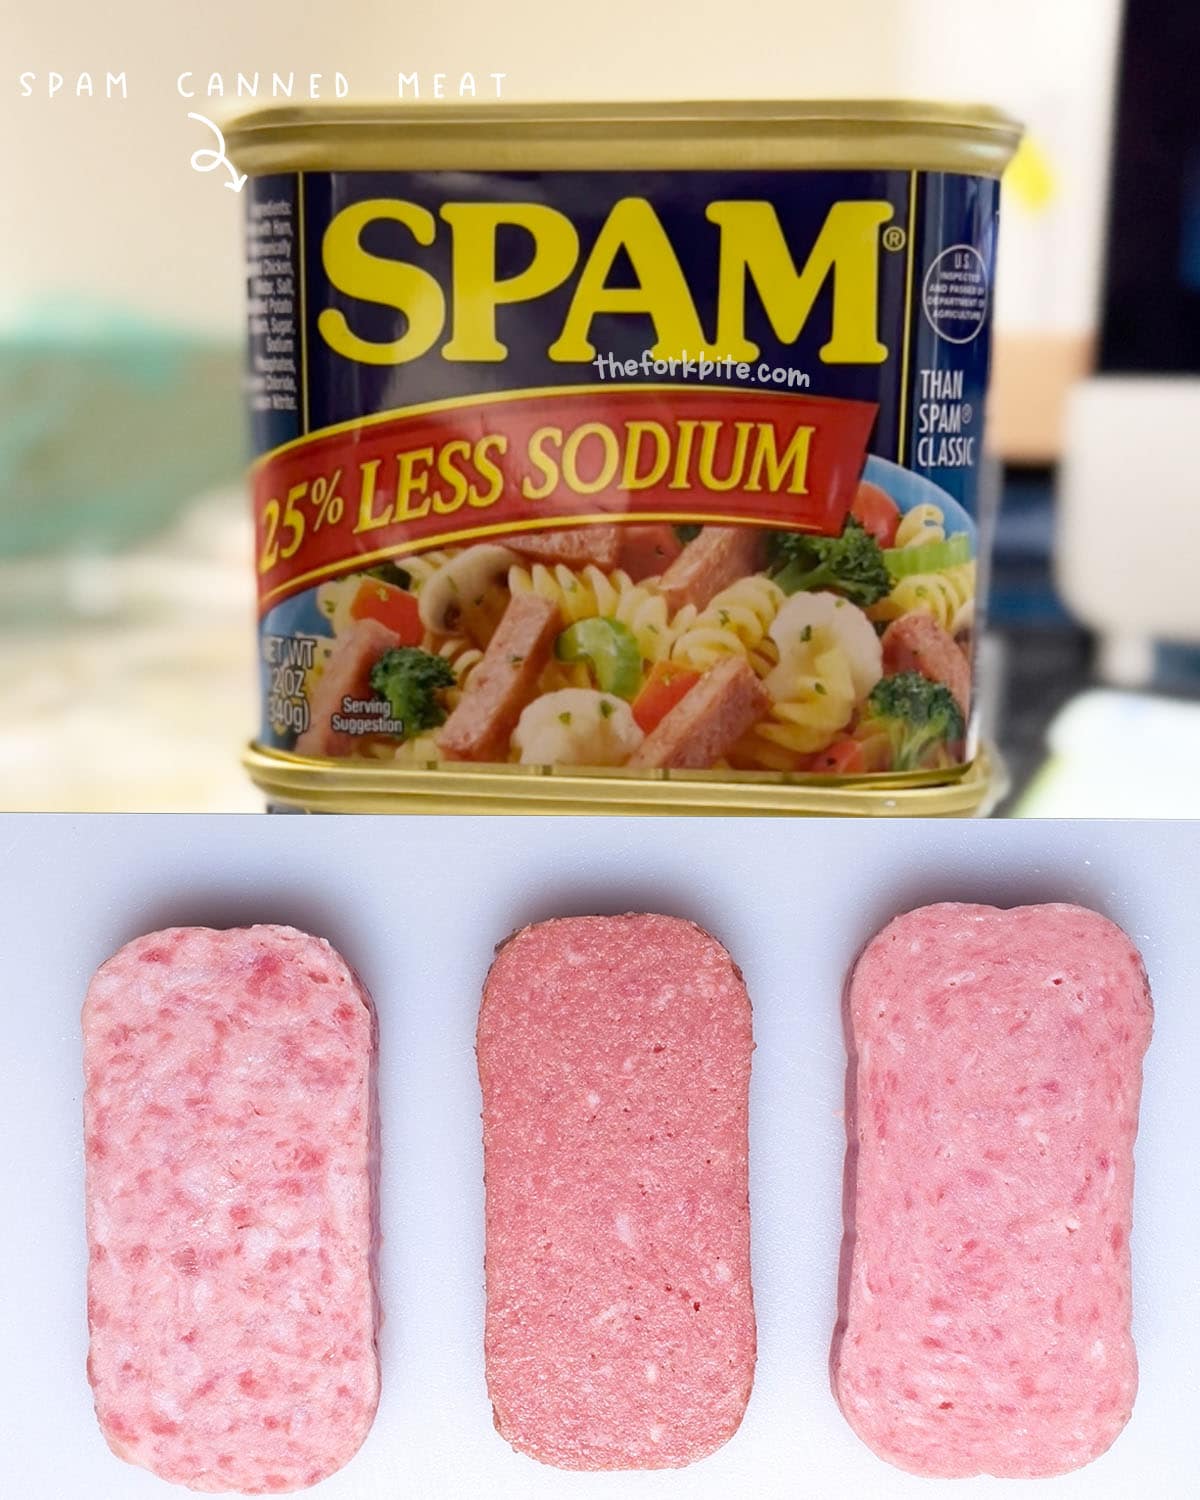 Air frying is a great way to cook spam because it gives it a crispy crust without making it greasy. So whether you're a fan of spam or you're just trying it for the first time, give this method a try!